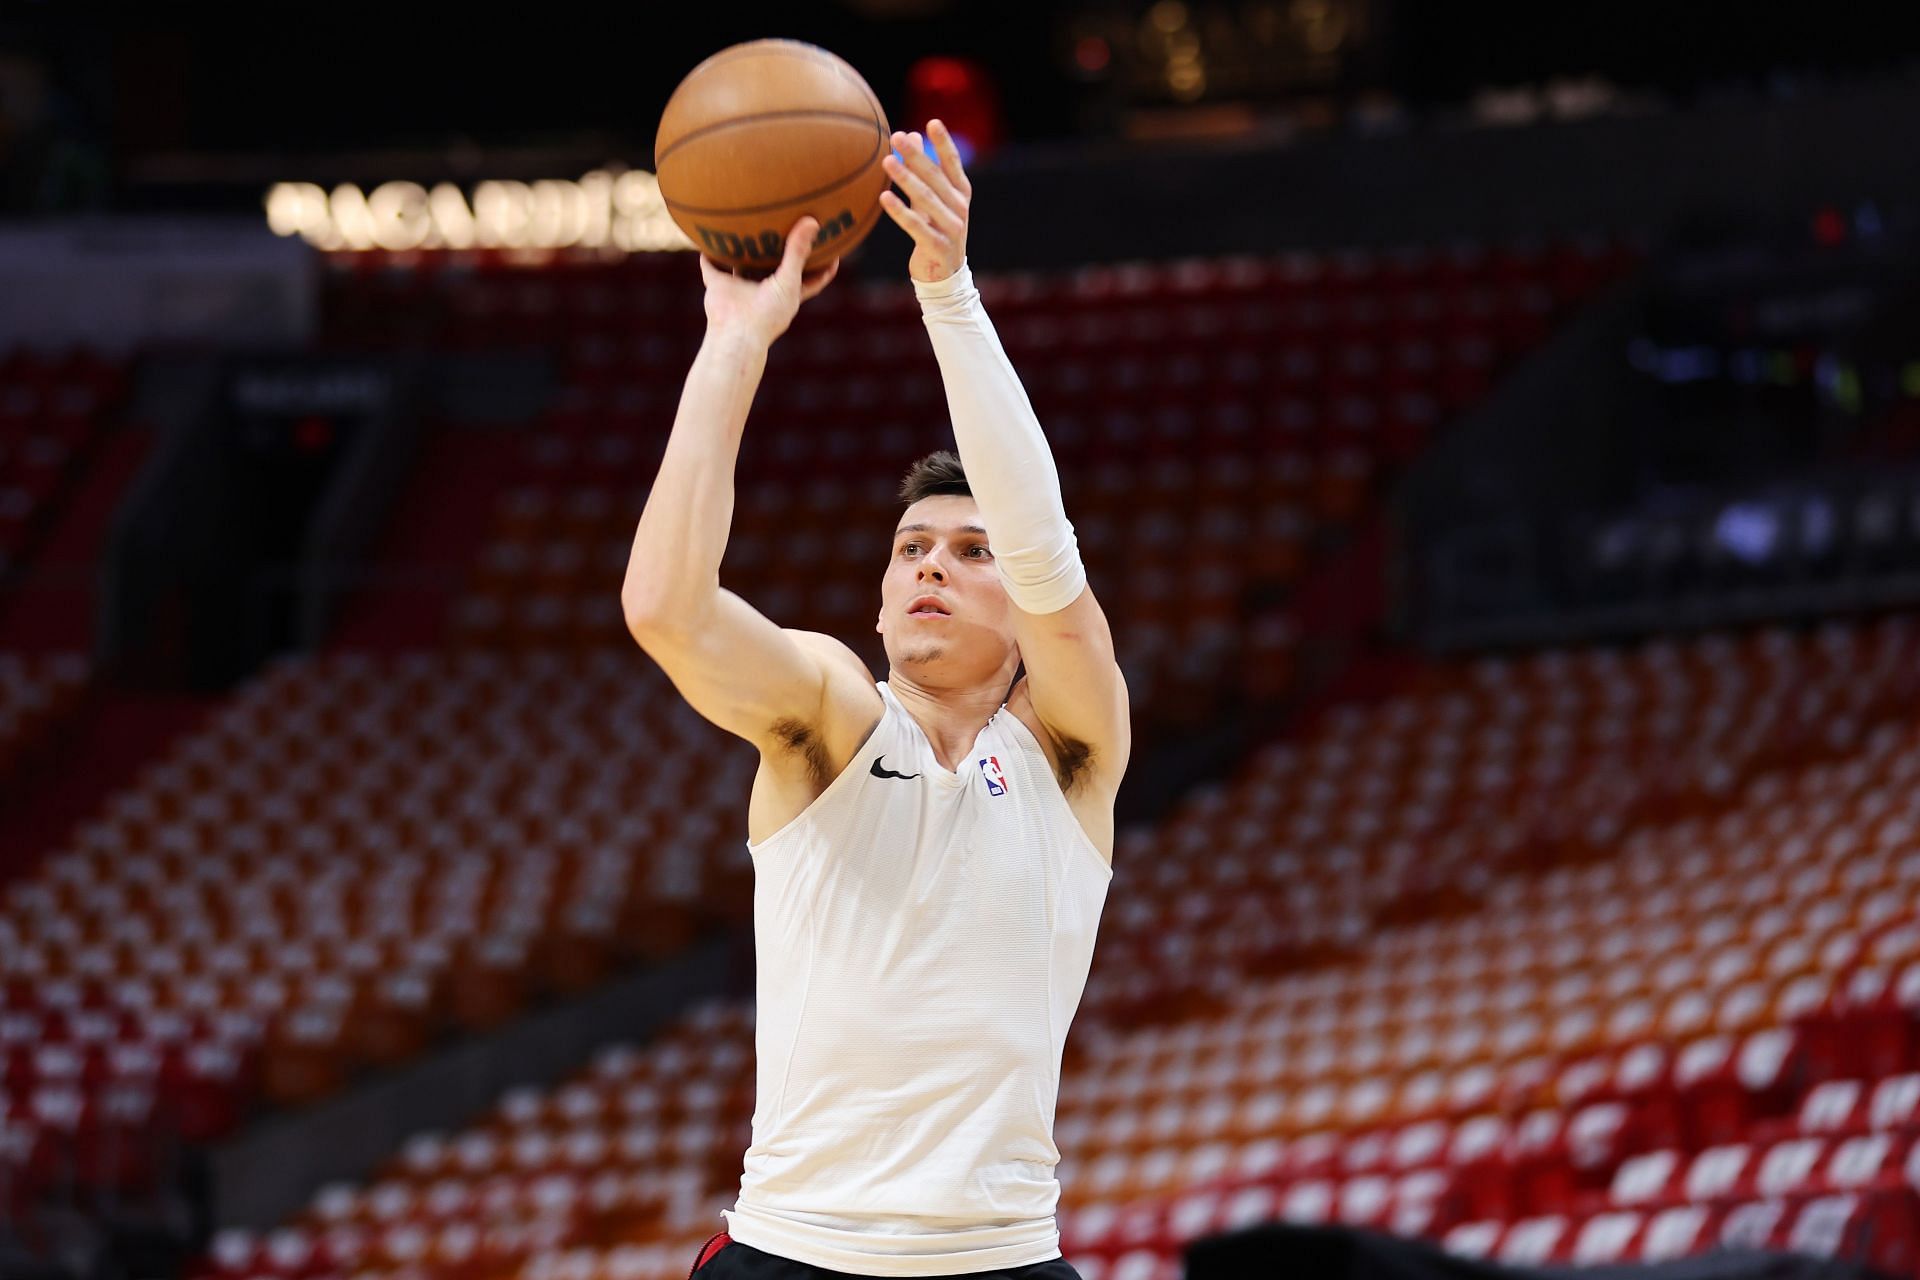 Tyler Herro No. 14 of the Miami Heat warms up prior to Game 1.